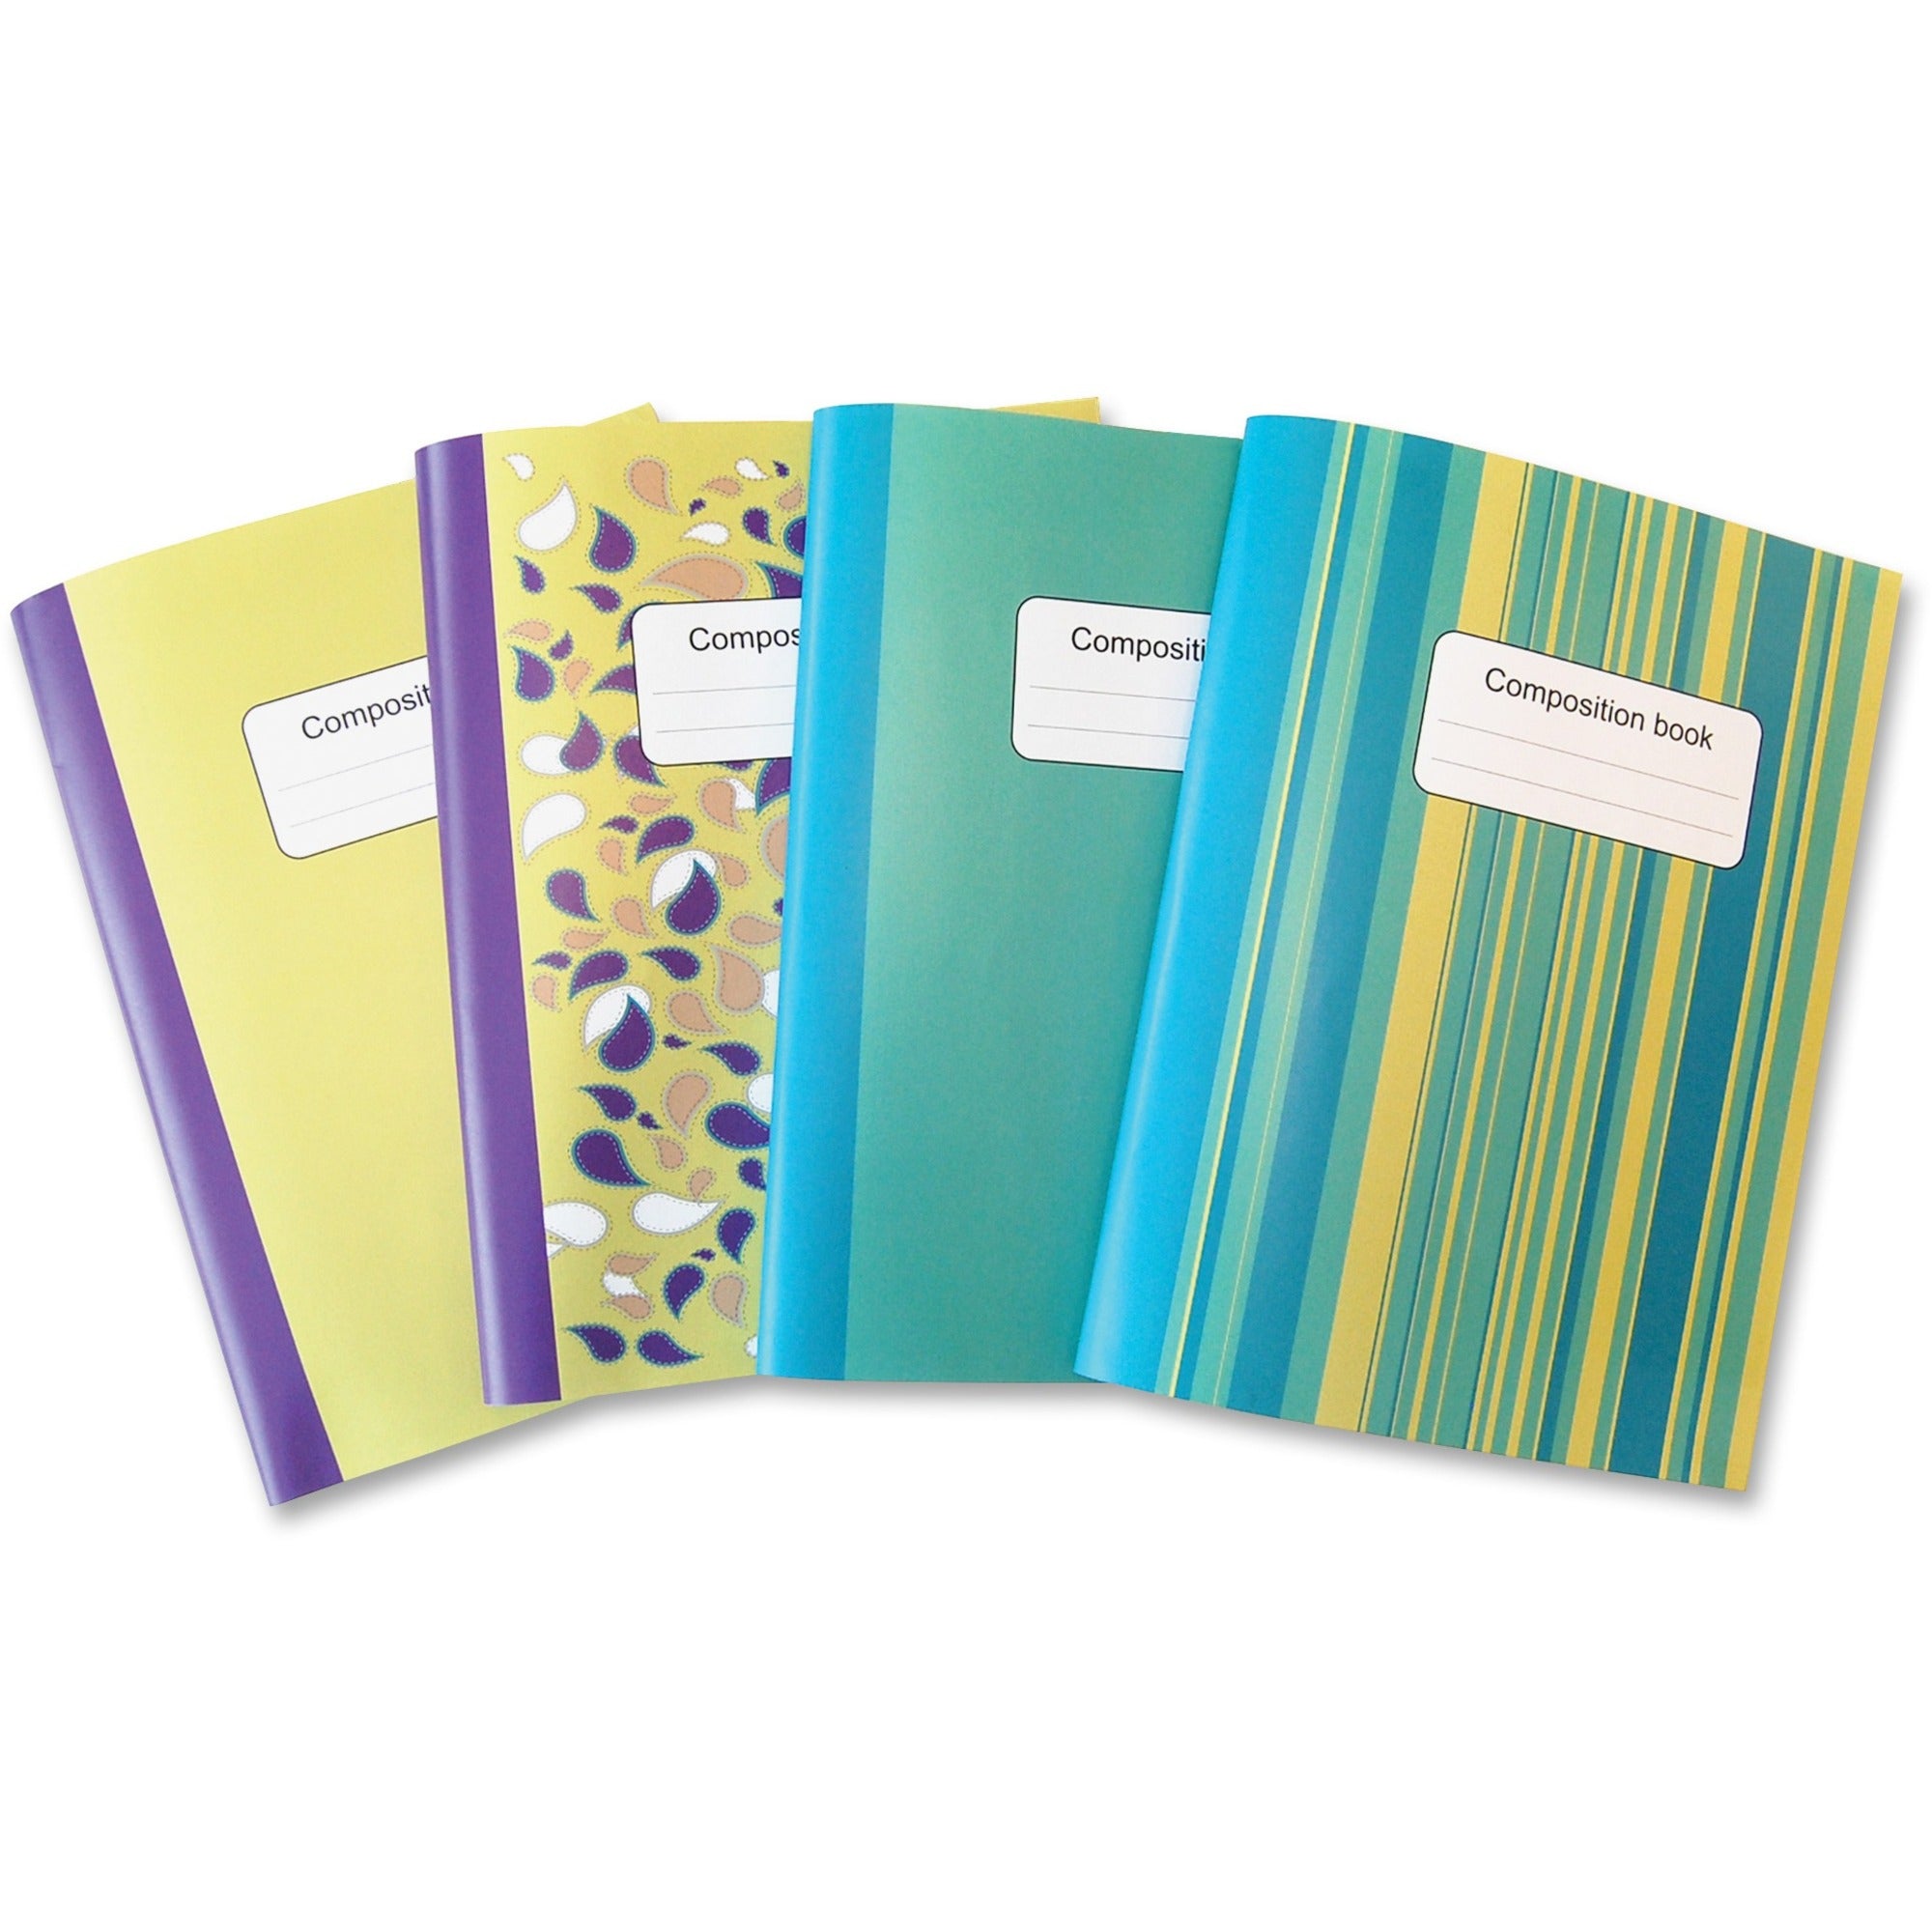 Sparco Composition Books - 80 Sheets - College Ruled - 9.75" x 7.5" - Multi-colored Cover - Sturdy Cover, Durable - 4 / Pack - 